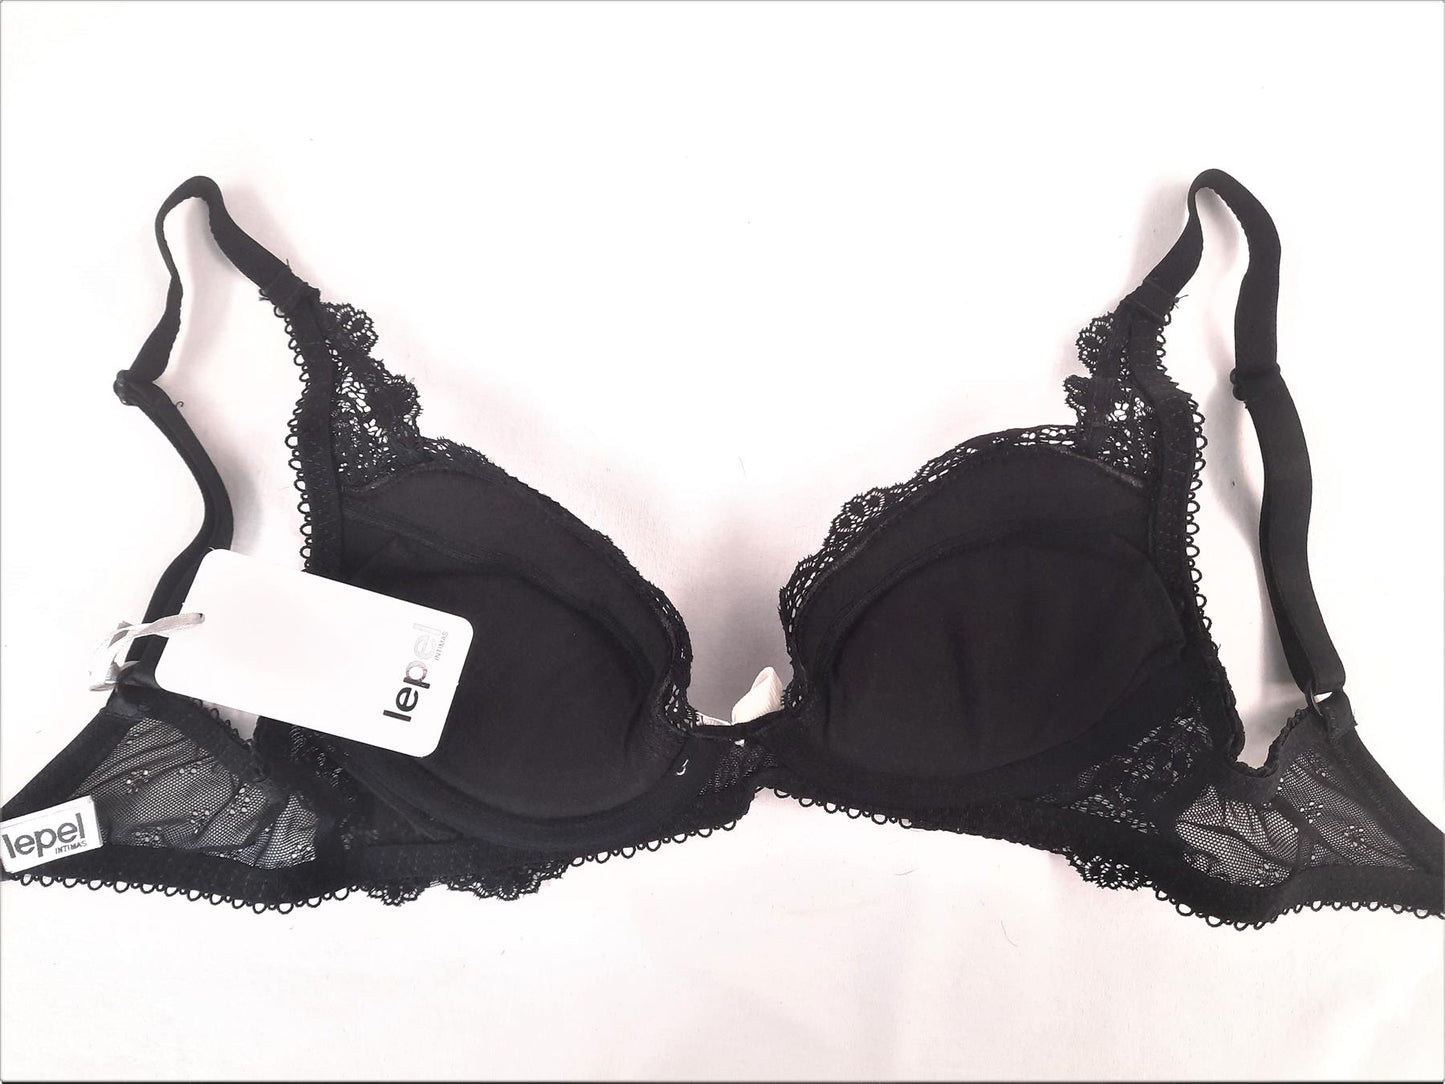 Lepel Constance Plunge Bra Underwired Removable Padding Lace Trim Black 30B New